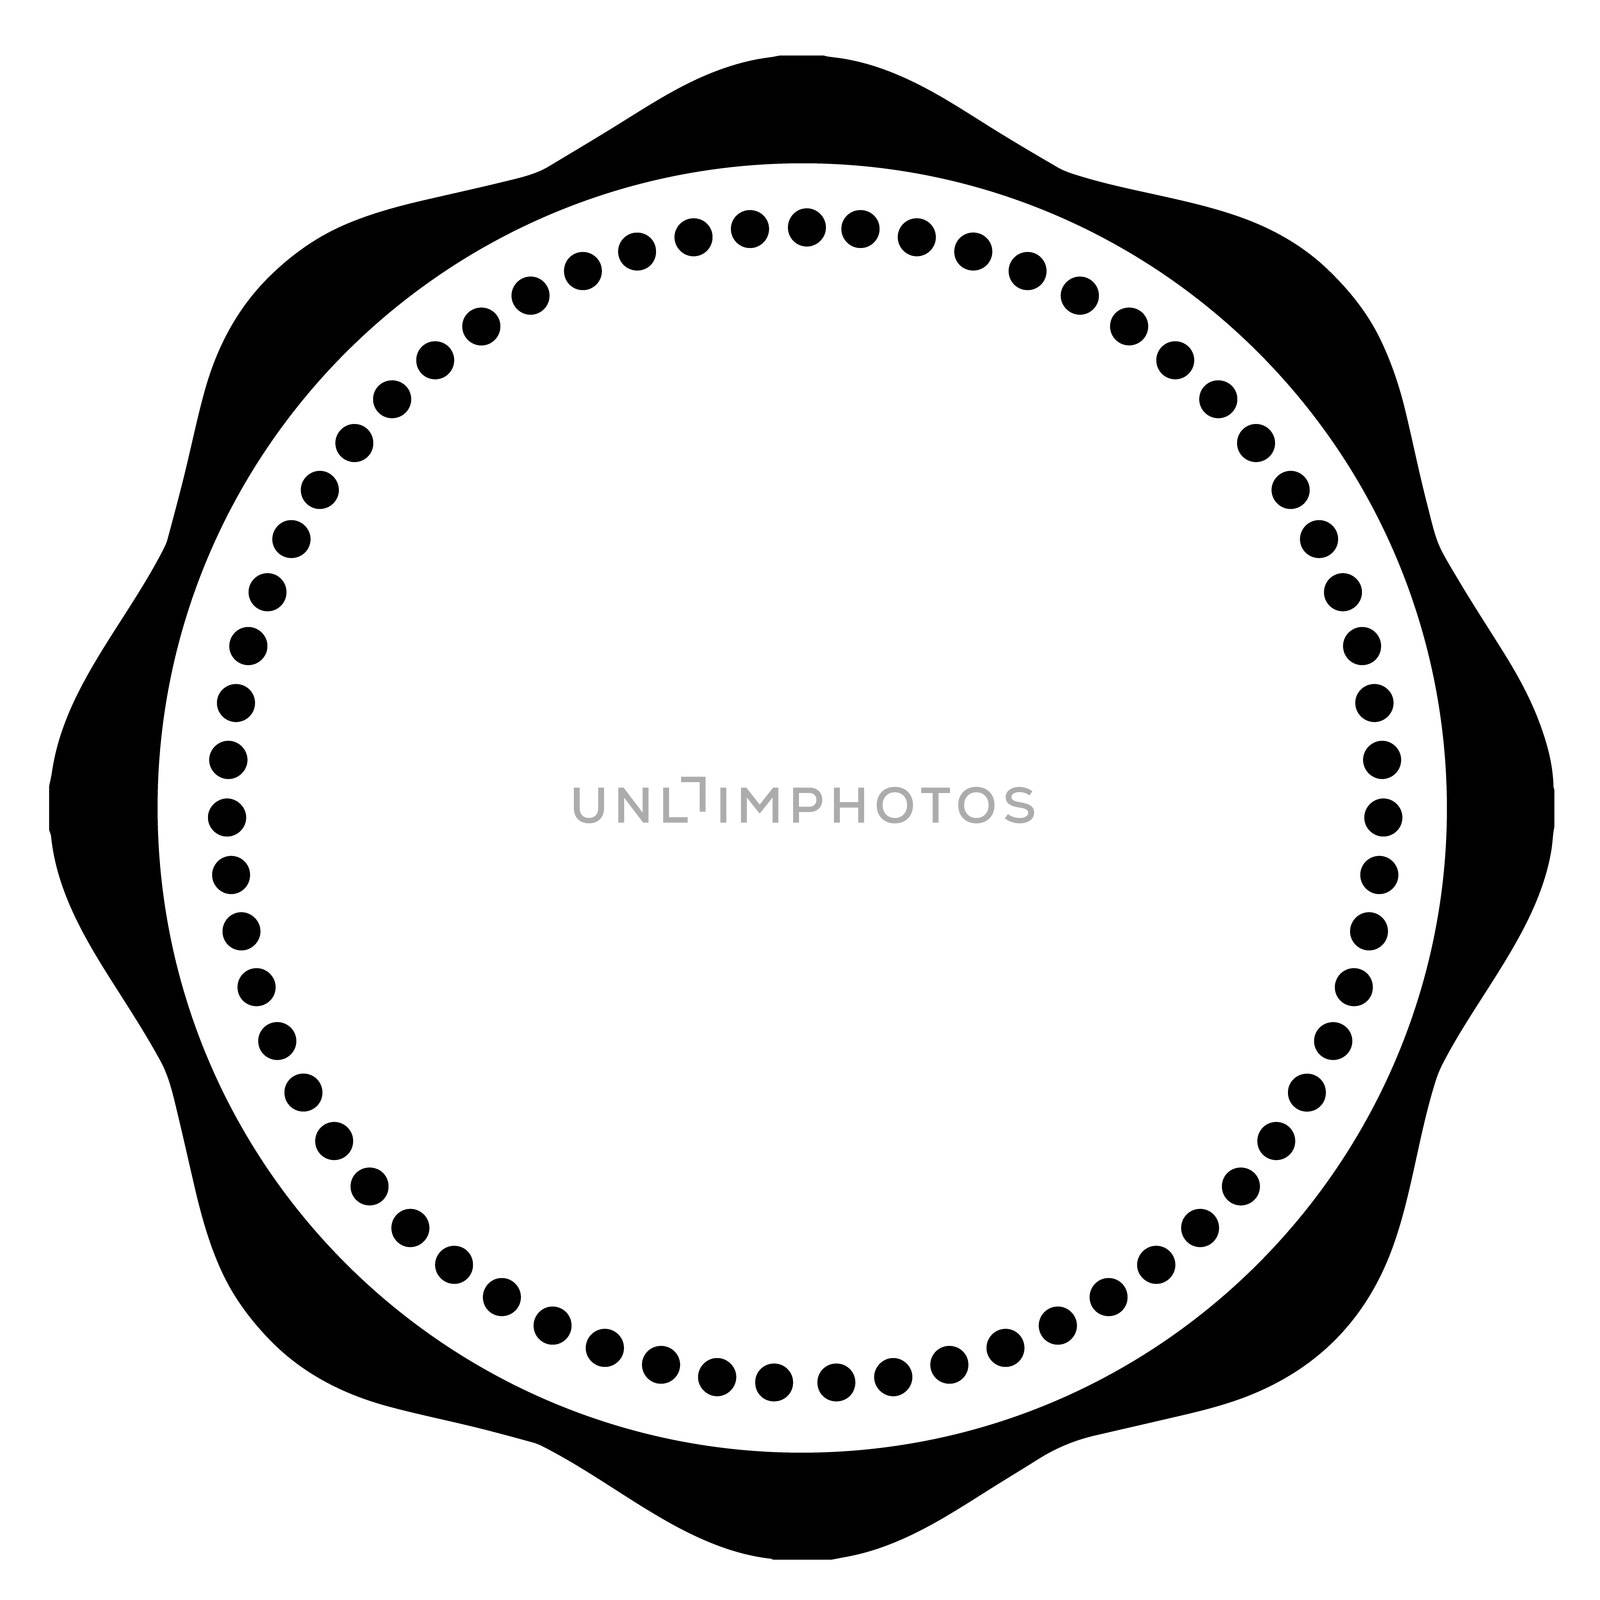 Black and white circle pattern, use as label or logo